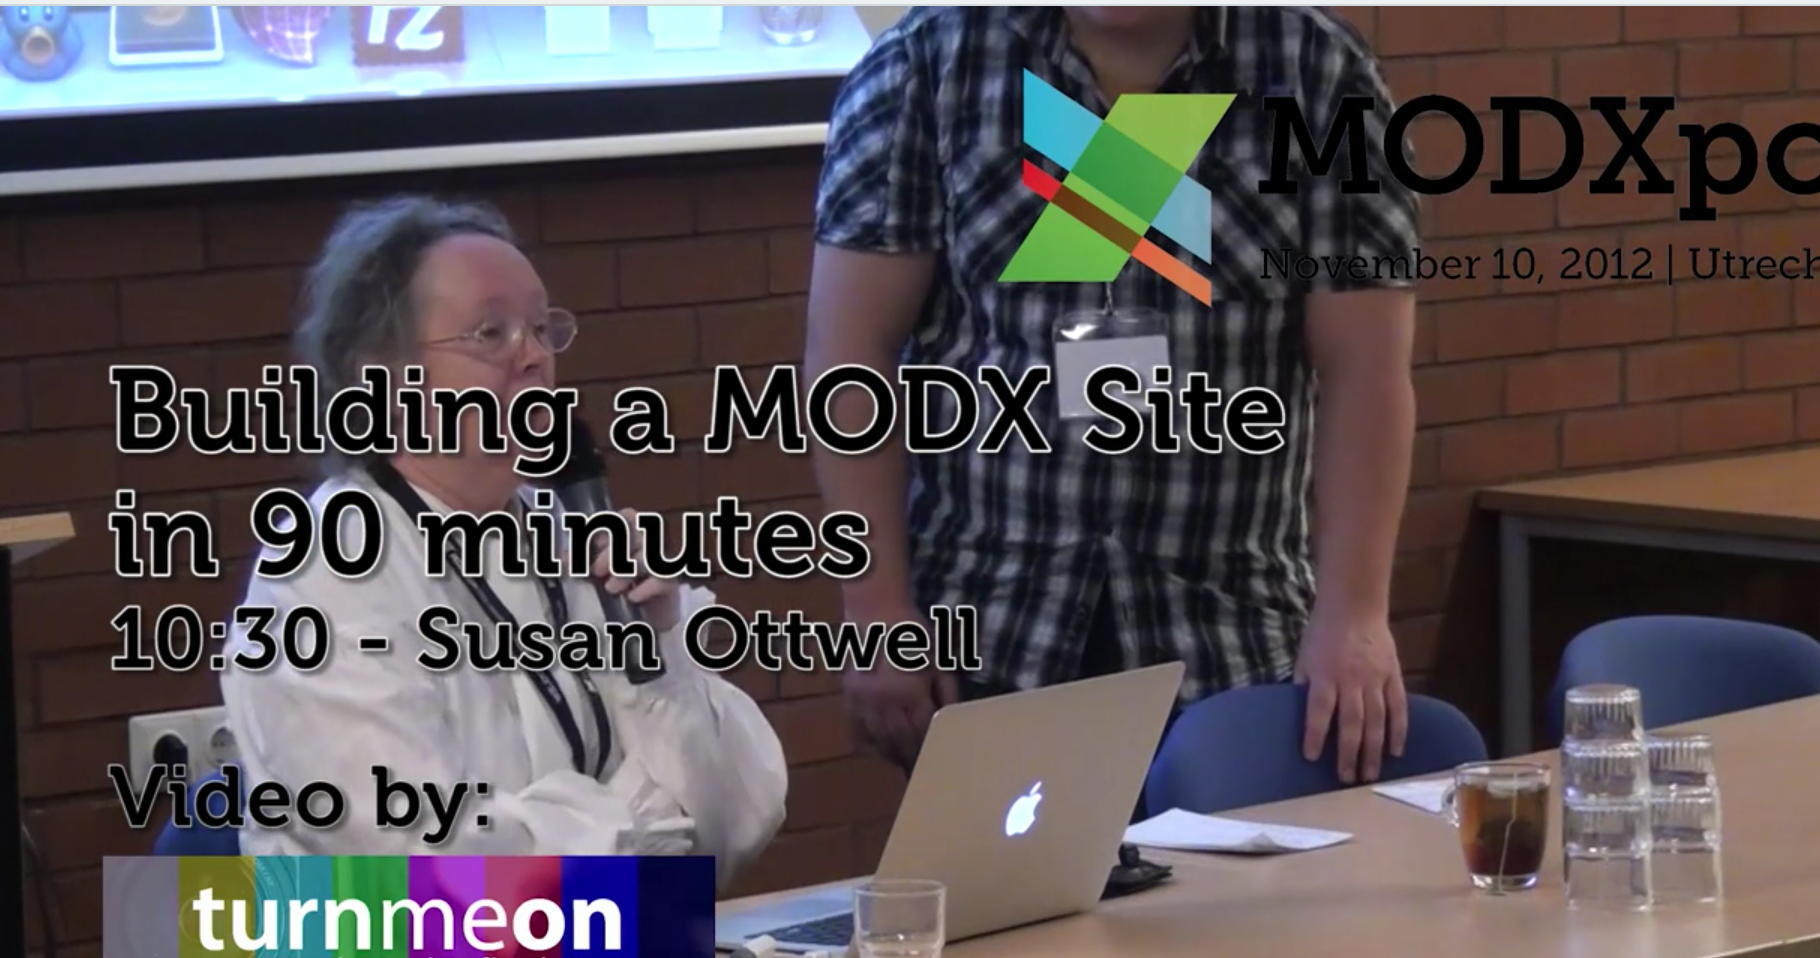 Build a MODX site in 90 minutes